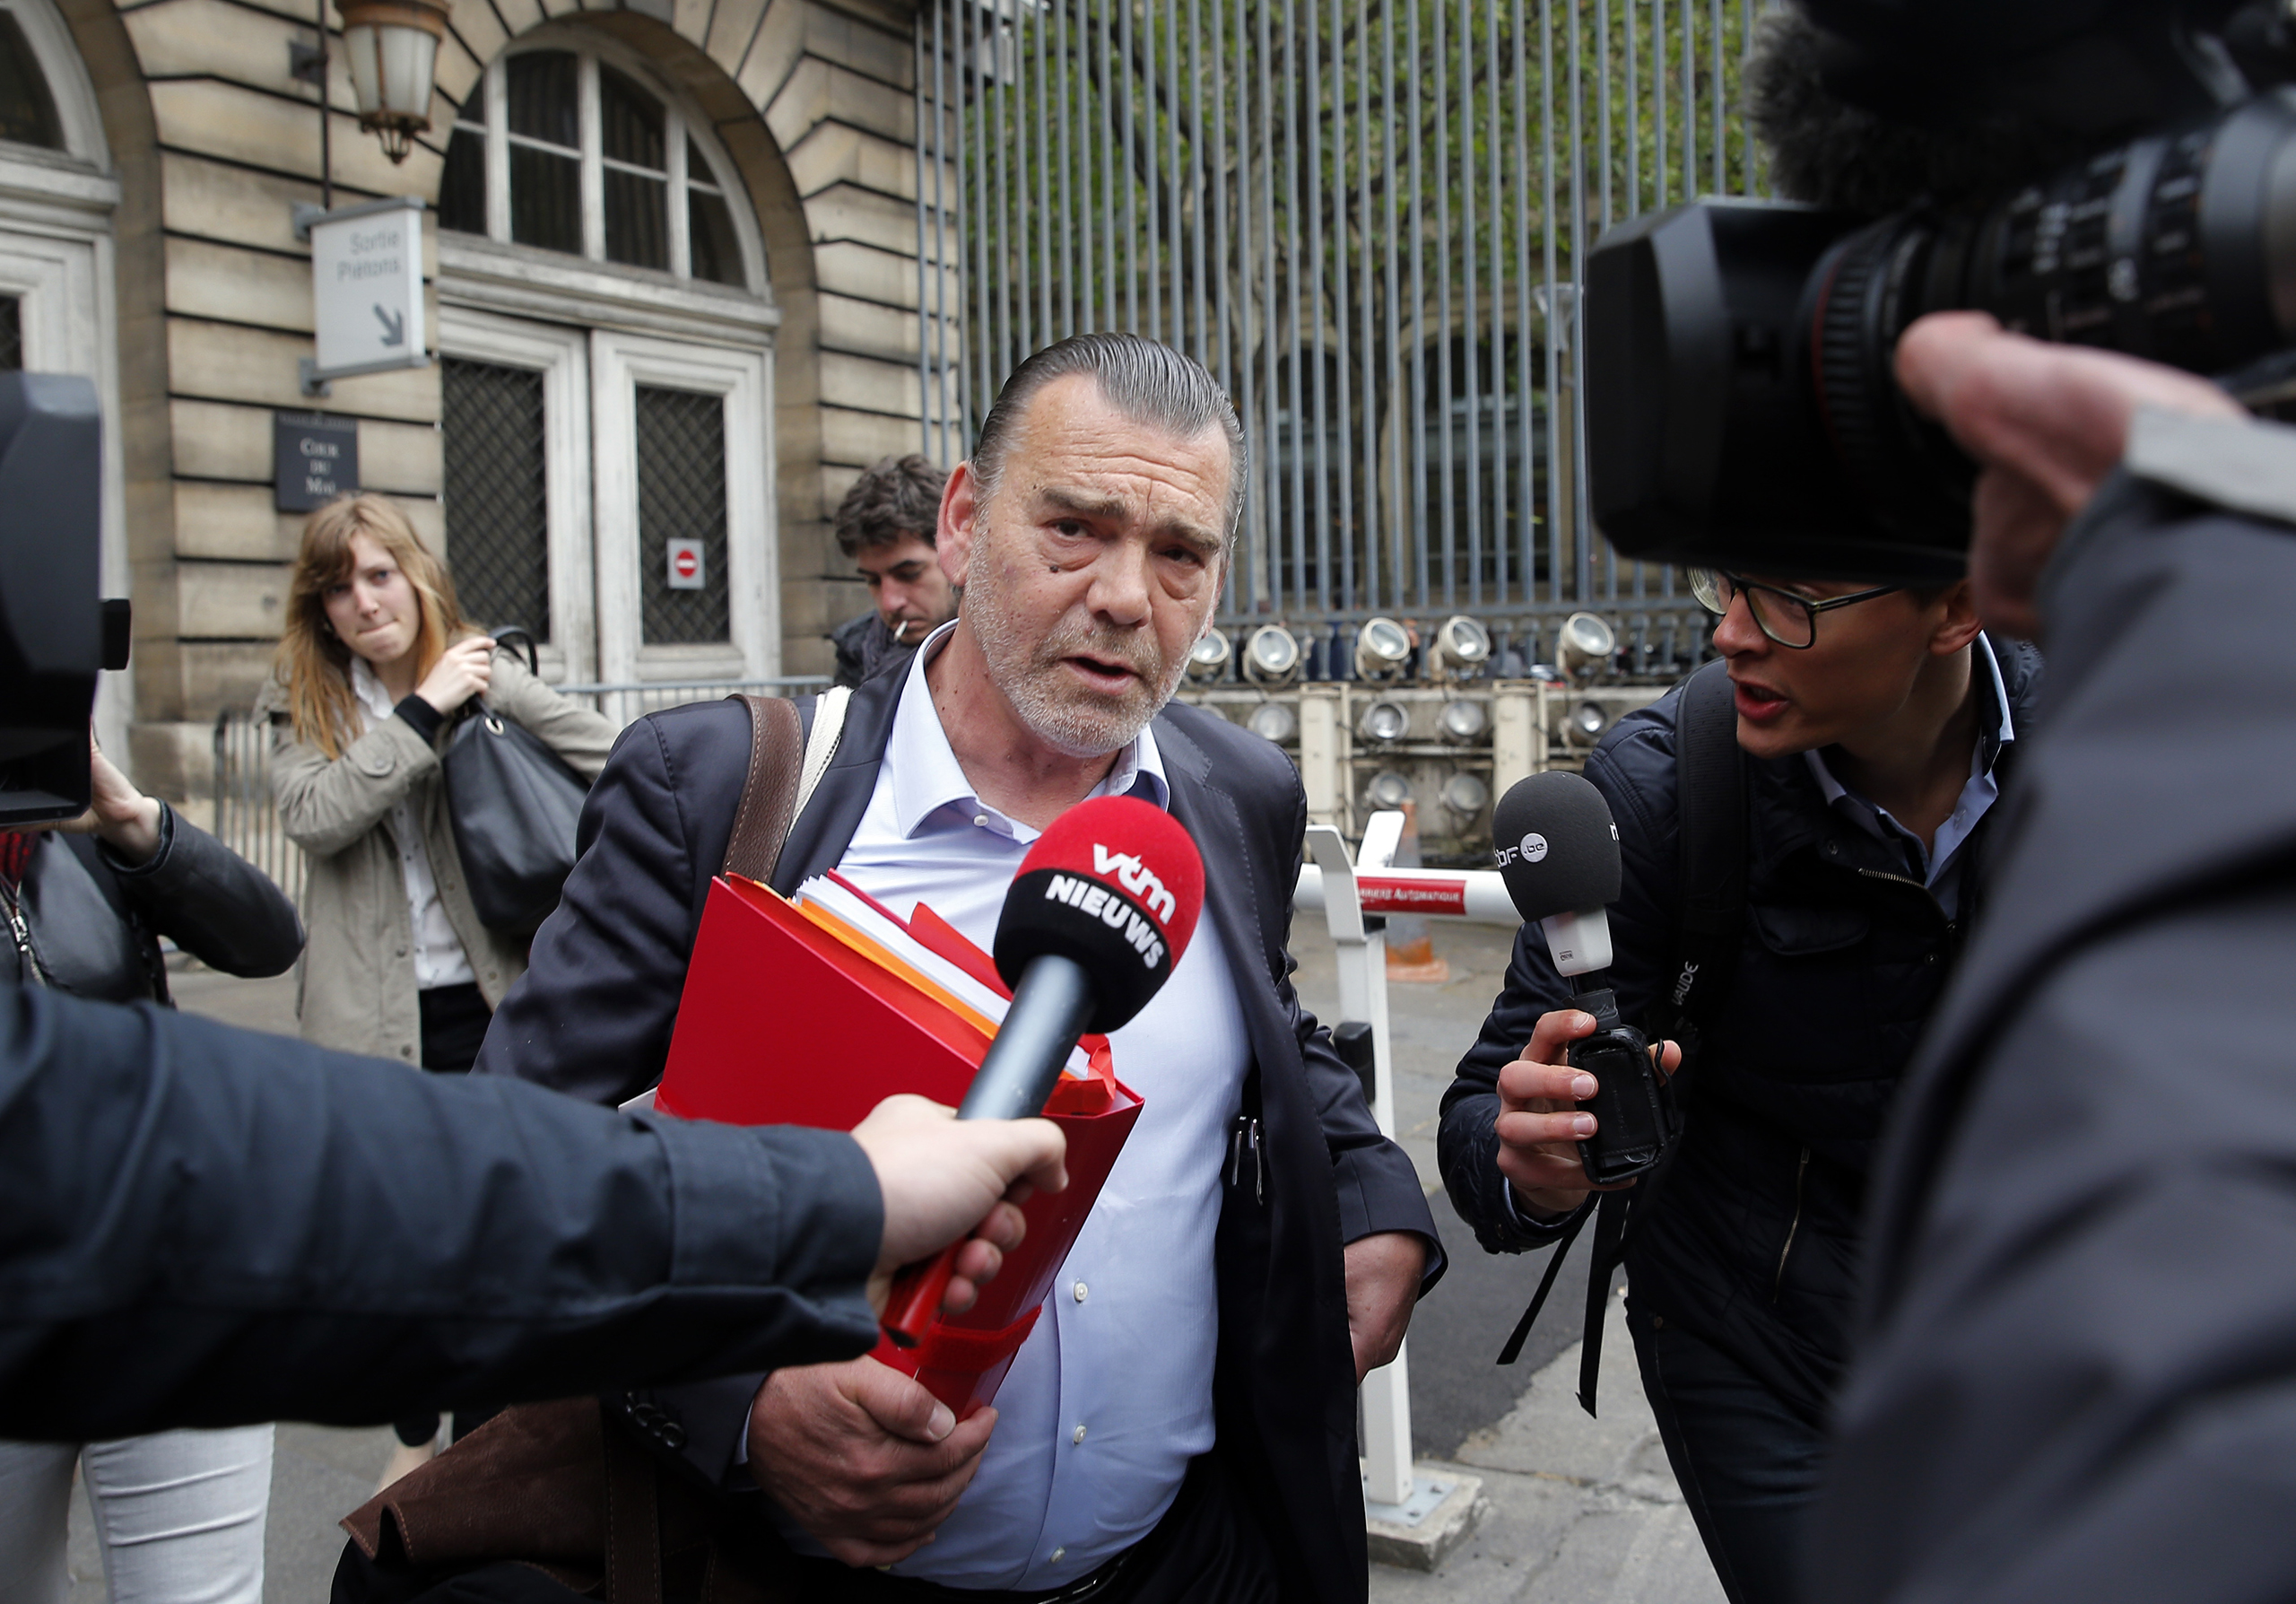 Frank Berton, lawyer of Paris attacks suspect Salah Abdeslam, addresses the media as he arrives at the courthouse In Paris, May 20, 2016. (Christophe Ena—AP)